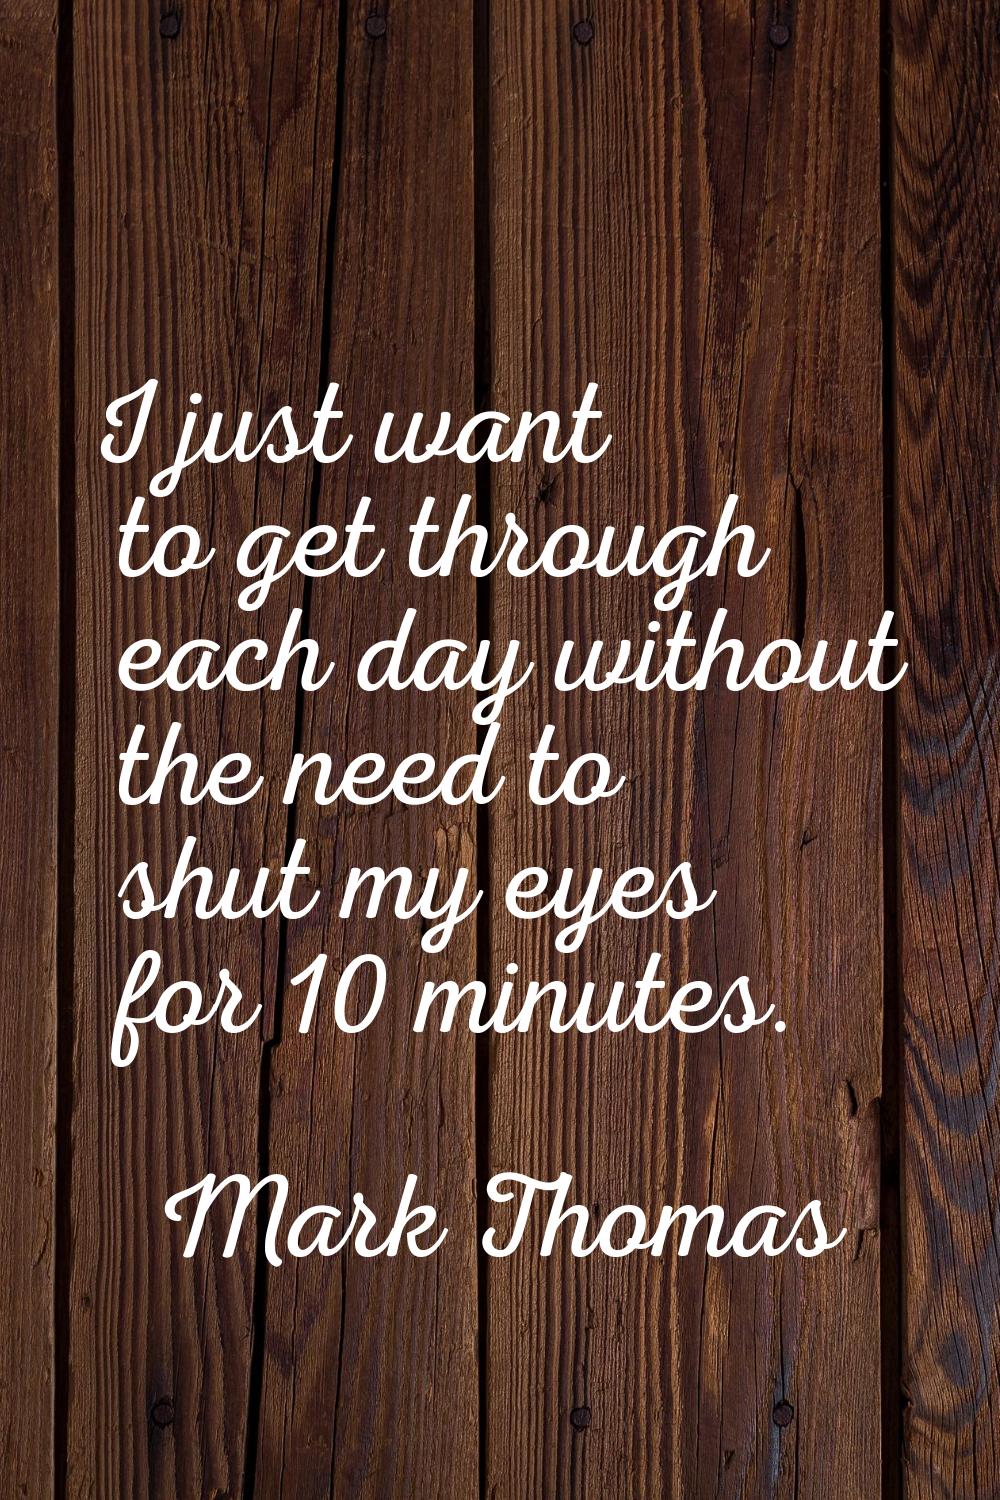 I just want to get through each day without the need to shut my eyes for 10 minutes.